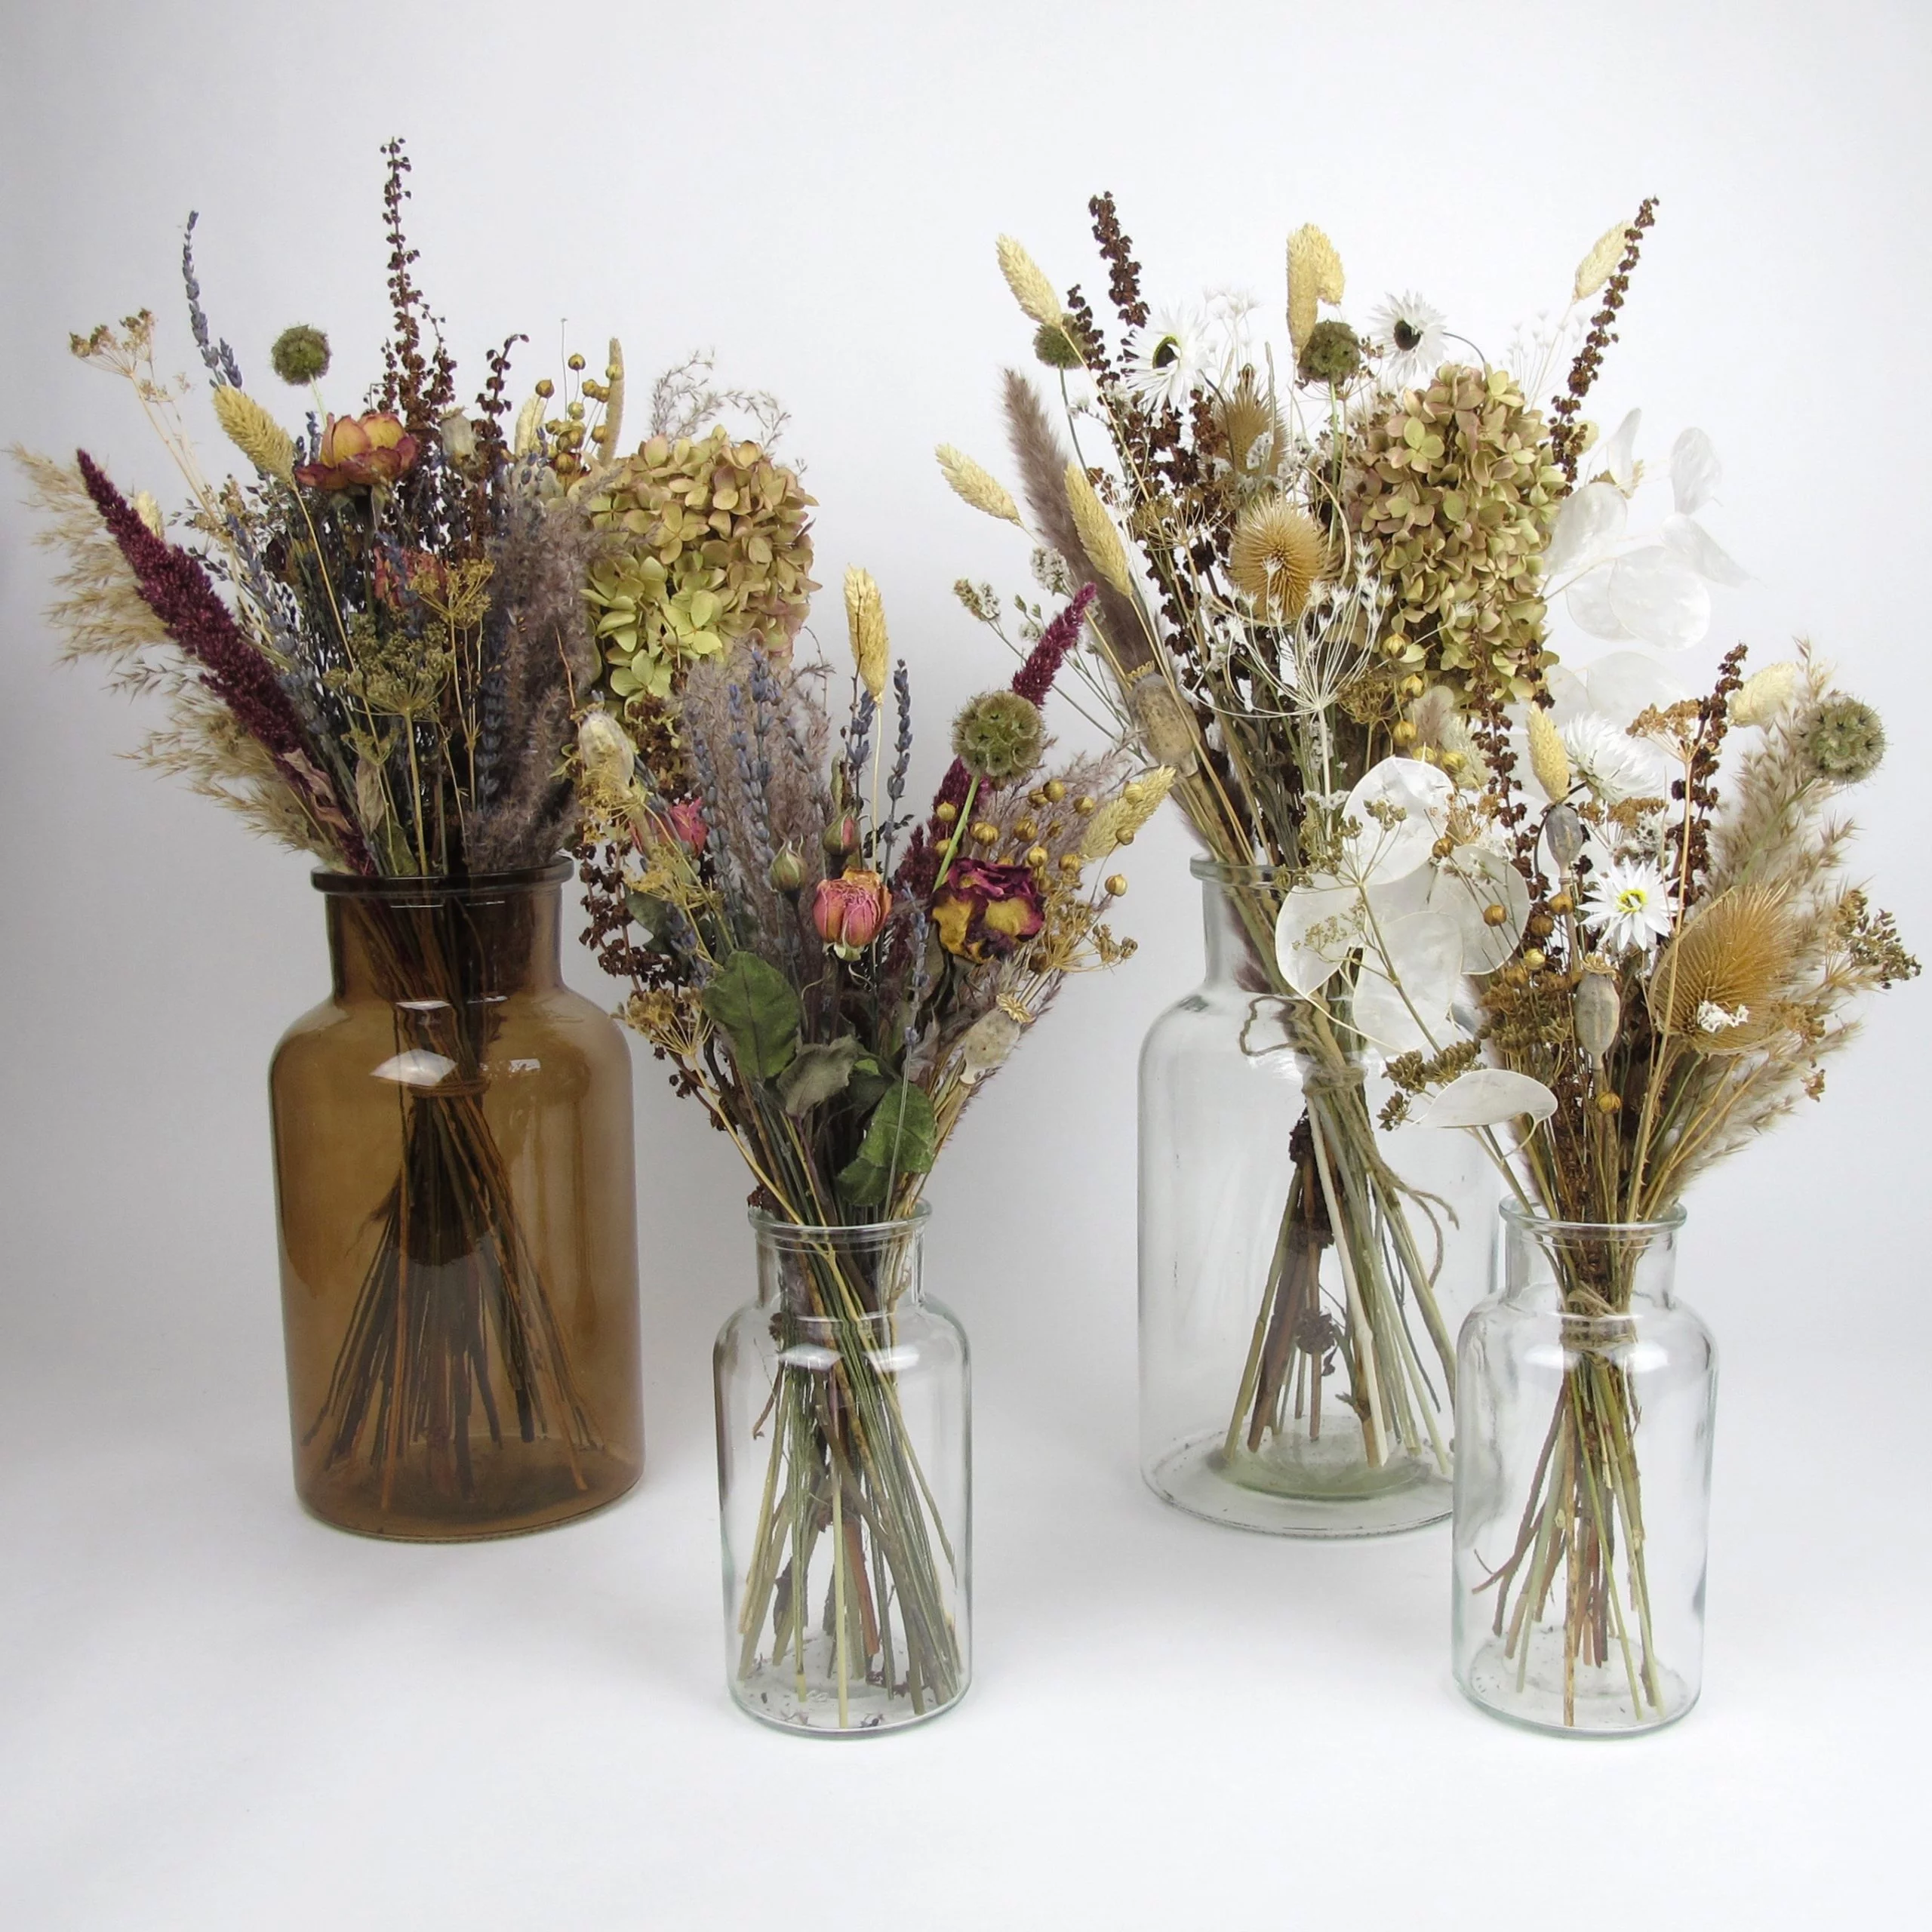 dried flowers and preserved